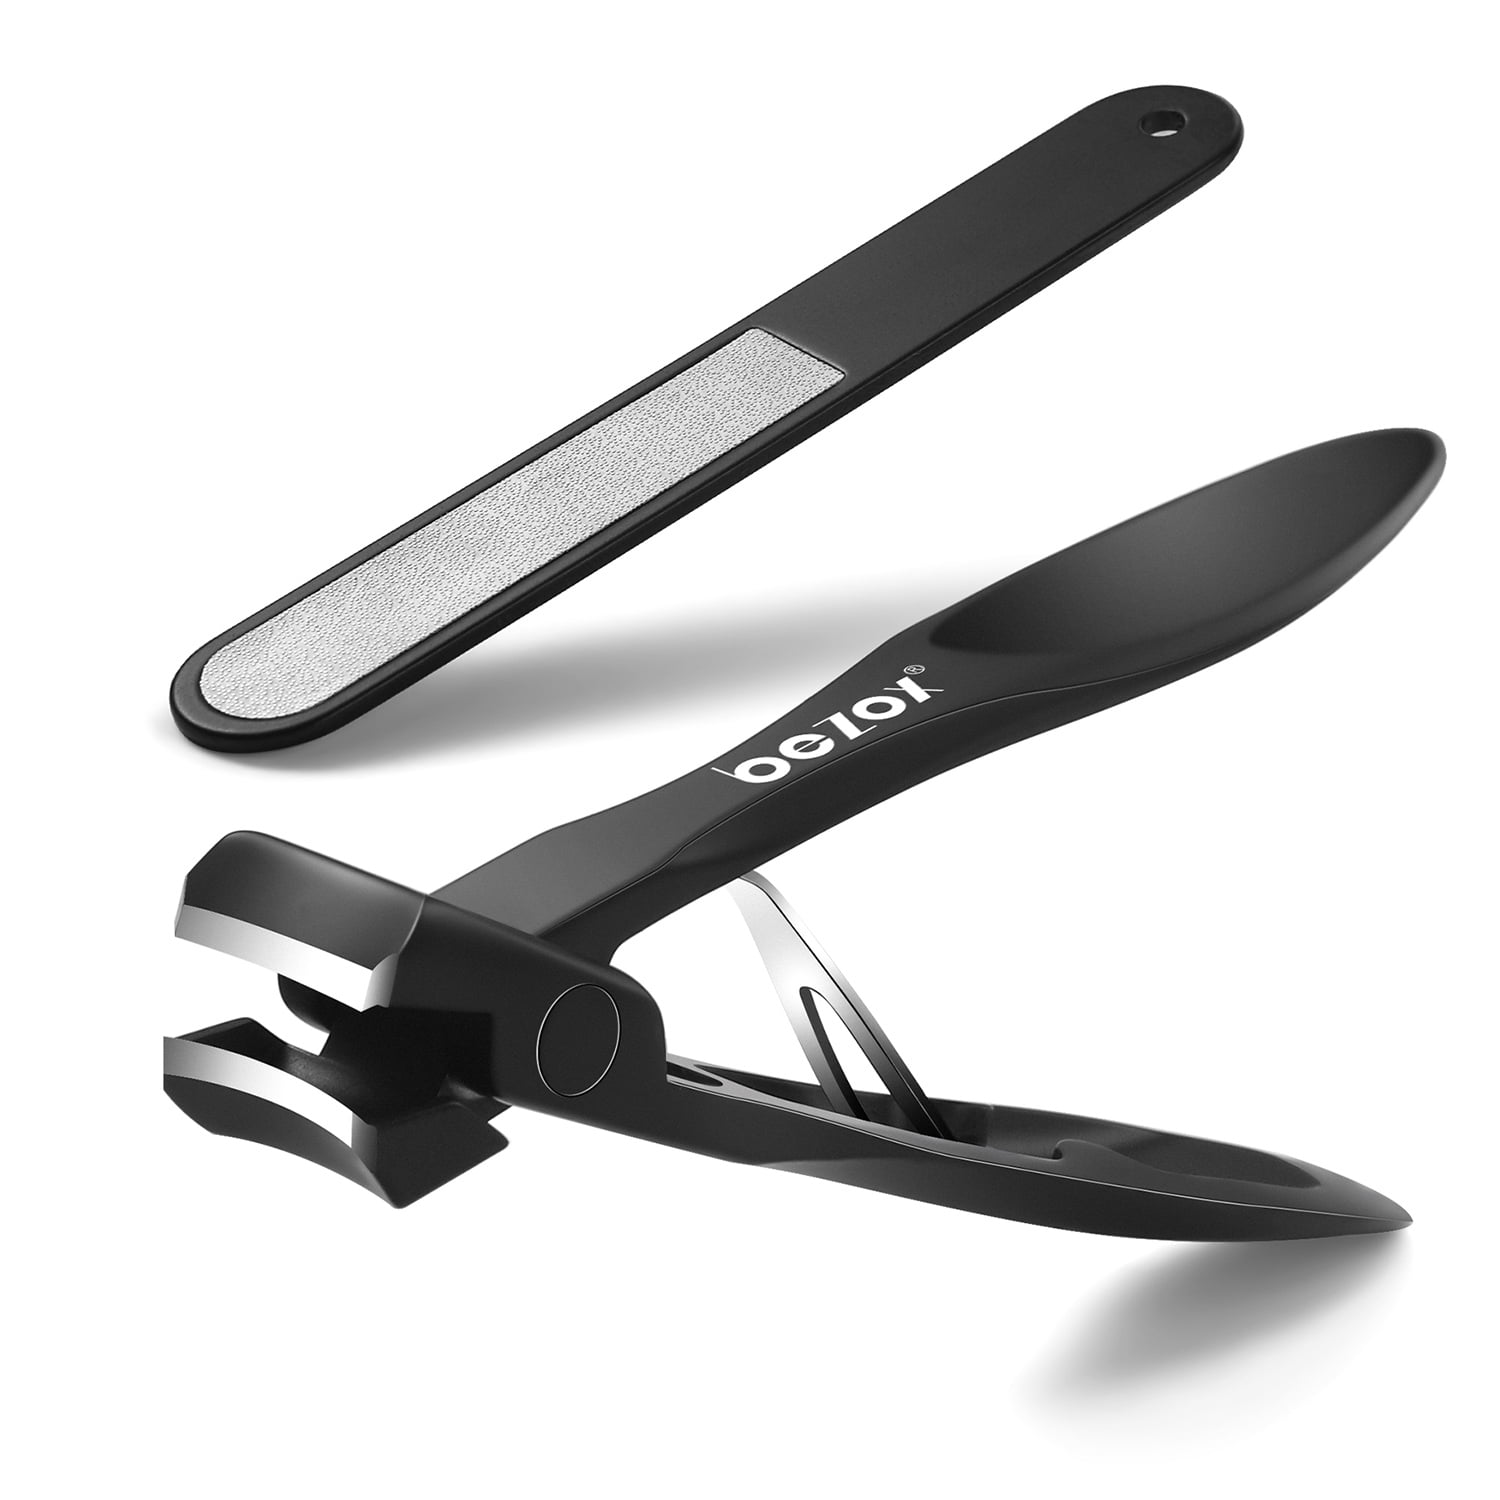 BEZOX Thick Nail Clippers with Metal Nail File - Fingernail and